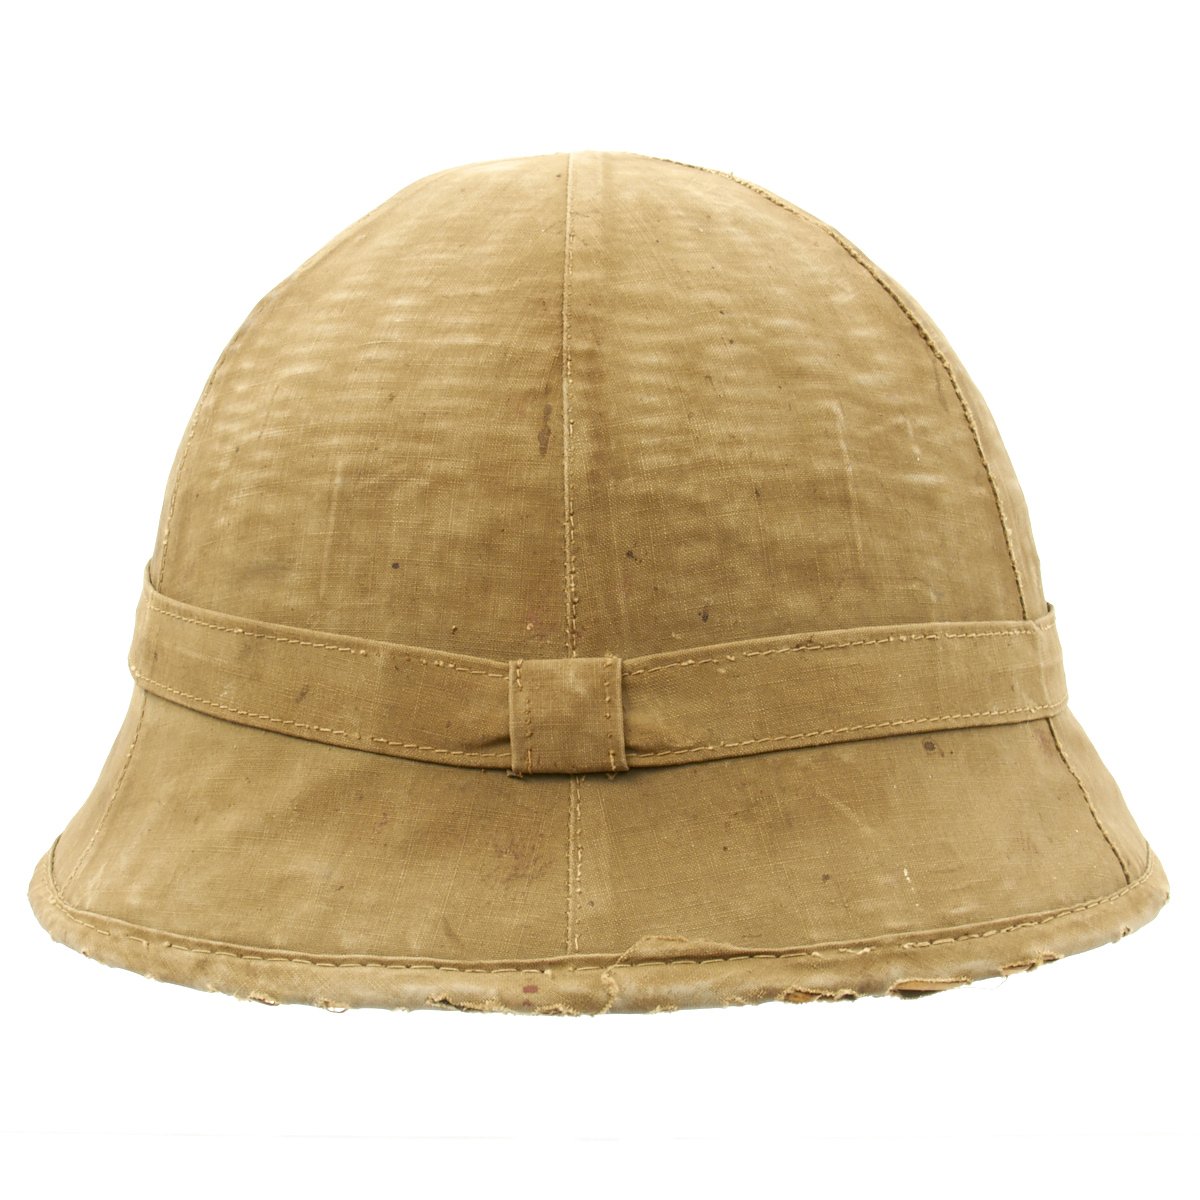 Original Imperial Japanese Army WWII Type 98 Sun Pith Helmet ...